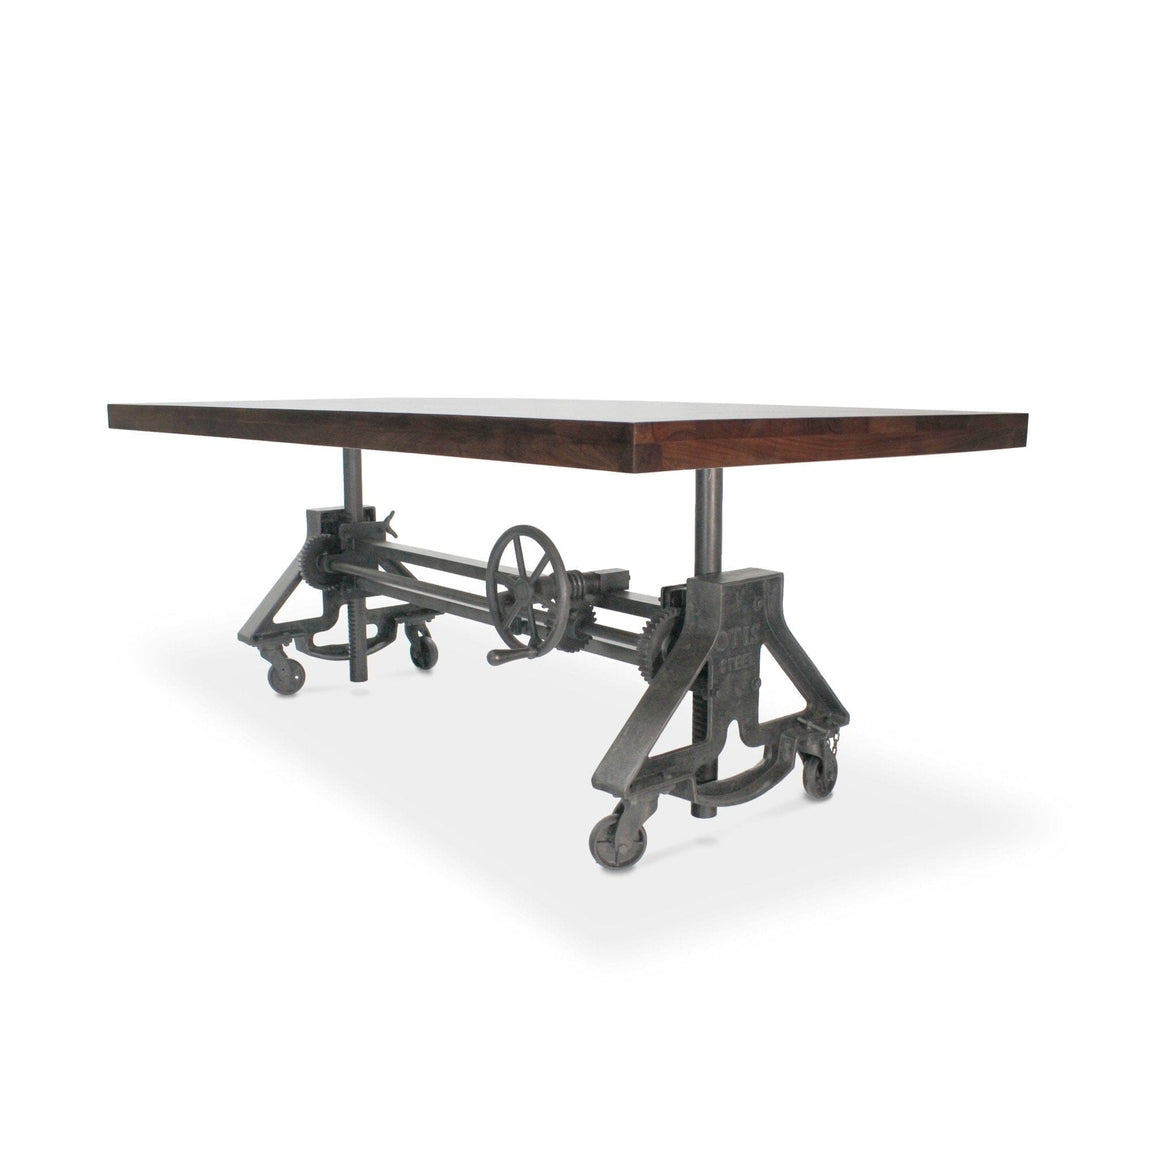 Otis Steel Dining Table - Adjustable Height - Iron Base - Casters - Walnut - Rustic Deco Incorporated